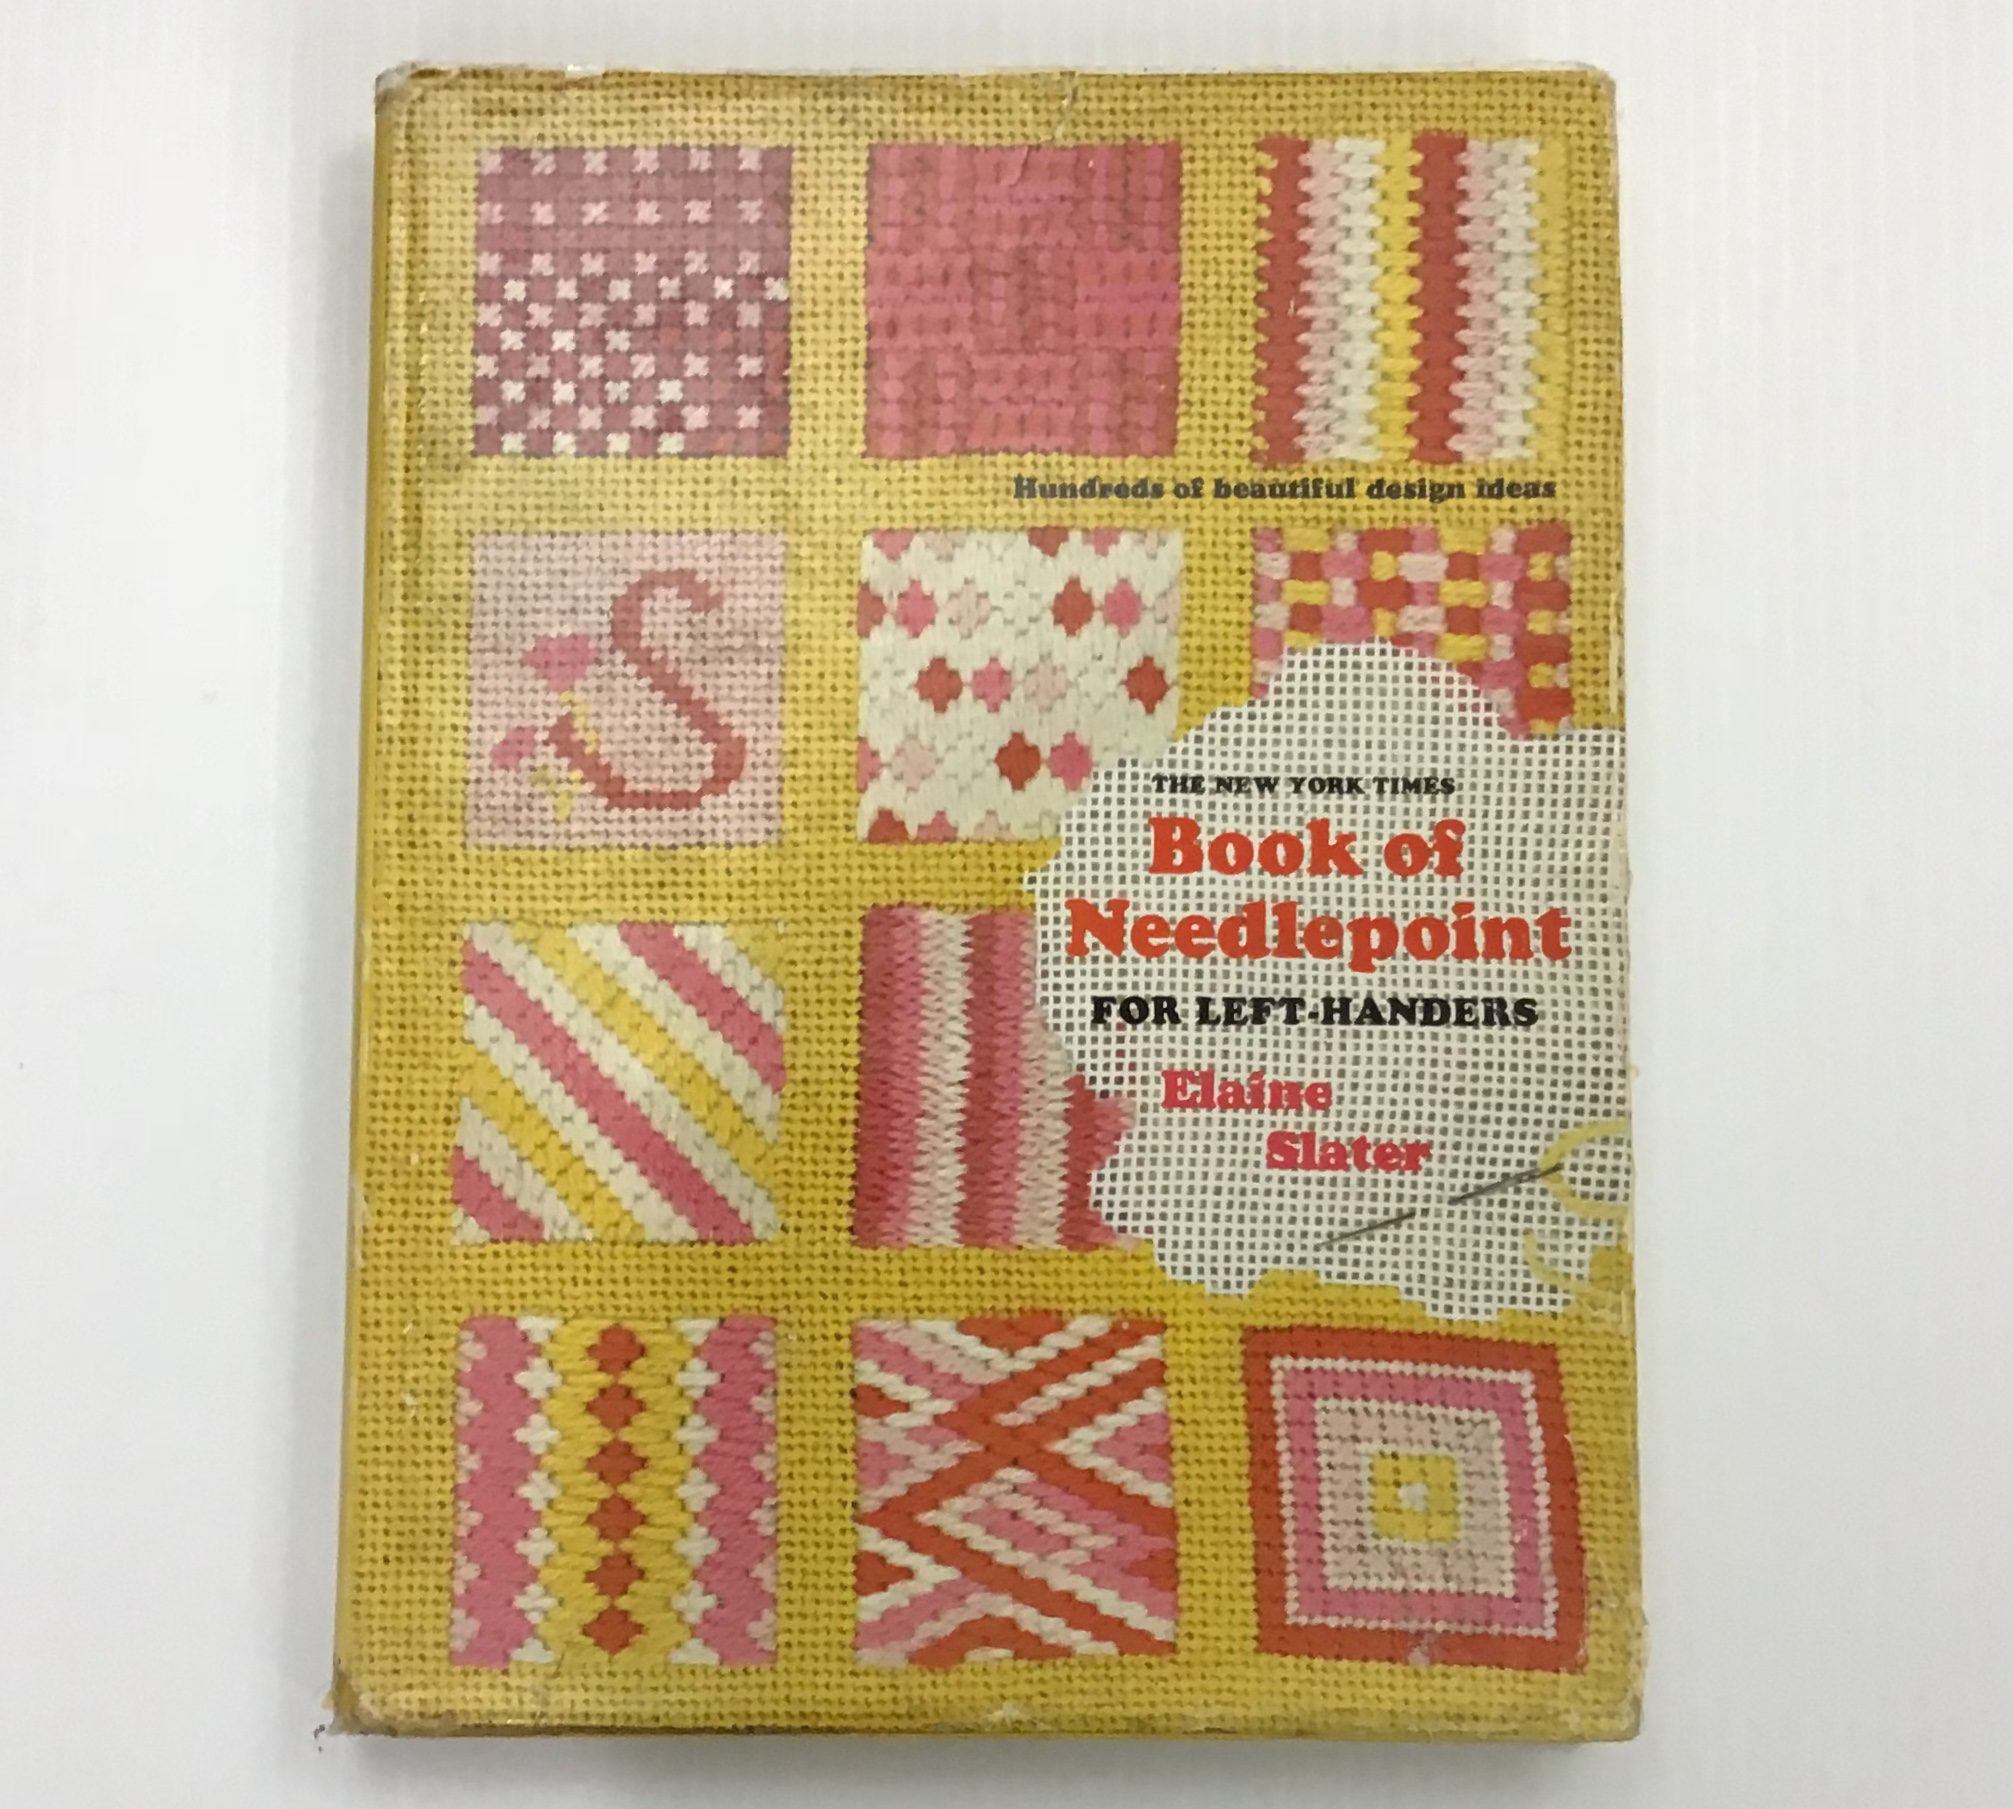 New York Times Book of Needlepoint by Elaine Slater, Hardcover